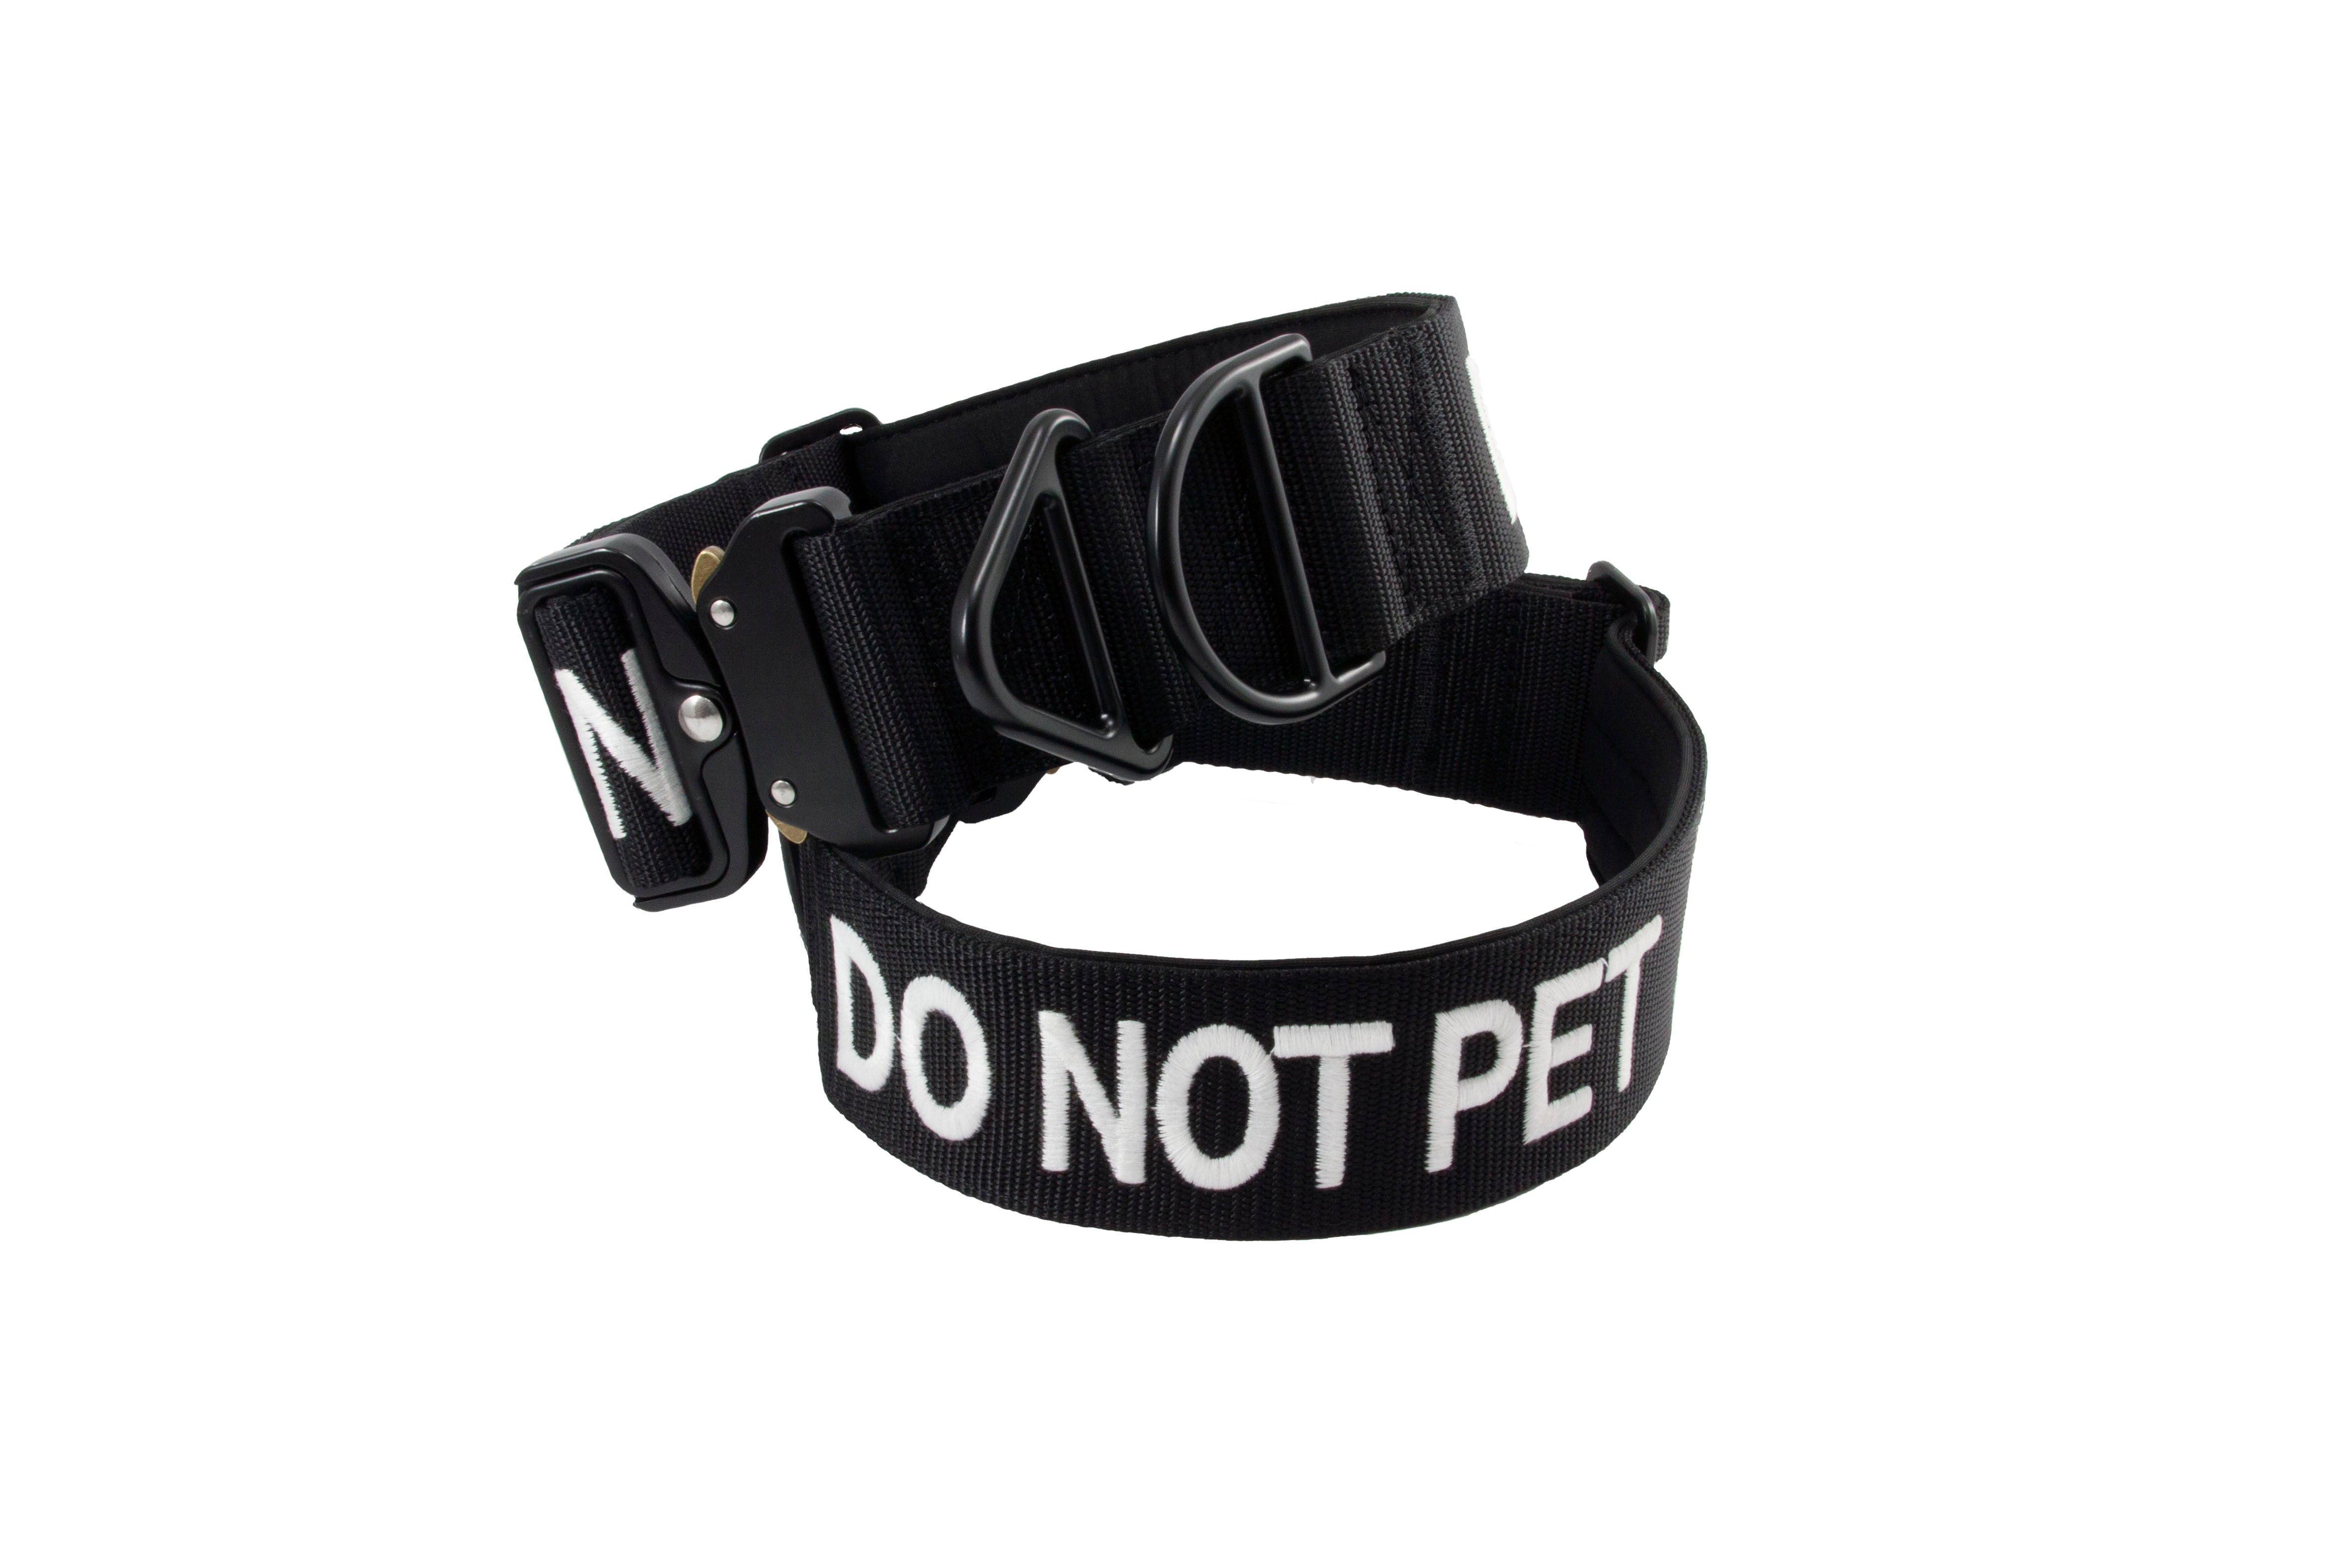 DO NOT PET, 2 inch Nylon Collar for Medium and Large Dogs, Neoprene Padded Inside, Communicate Your Dogs Needs to Prevent Accidents